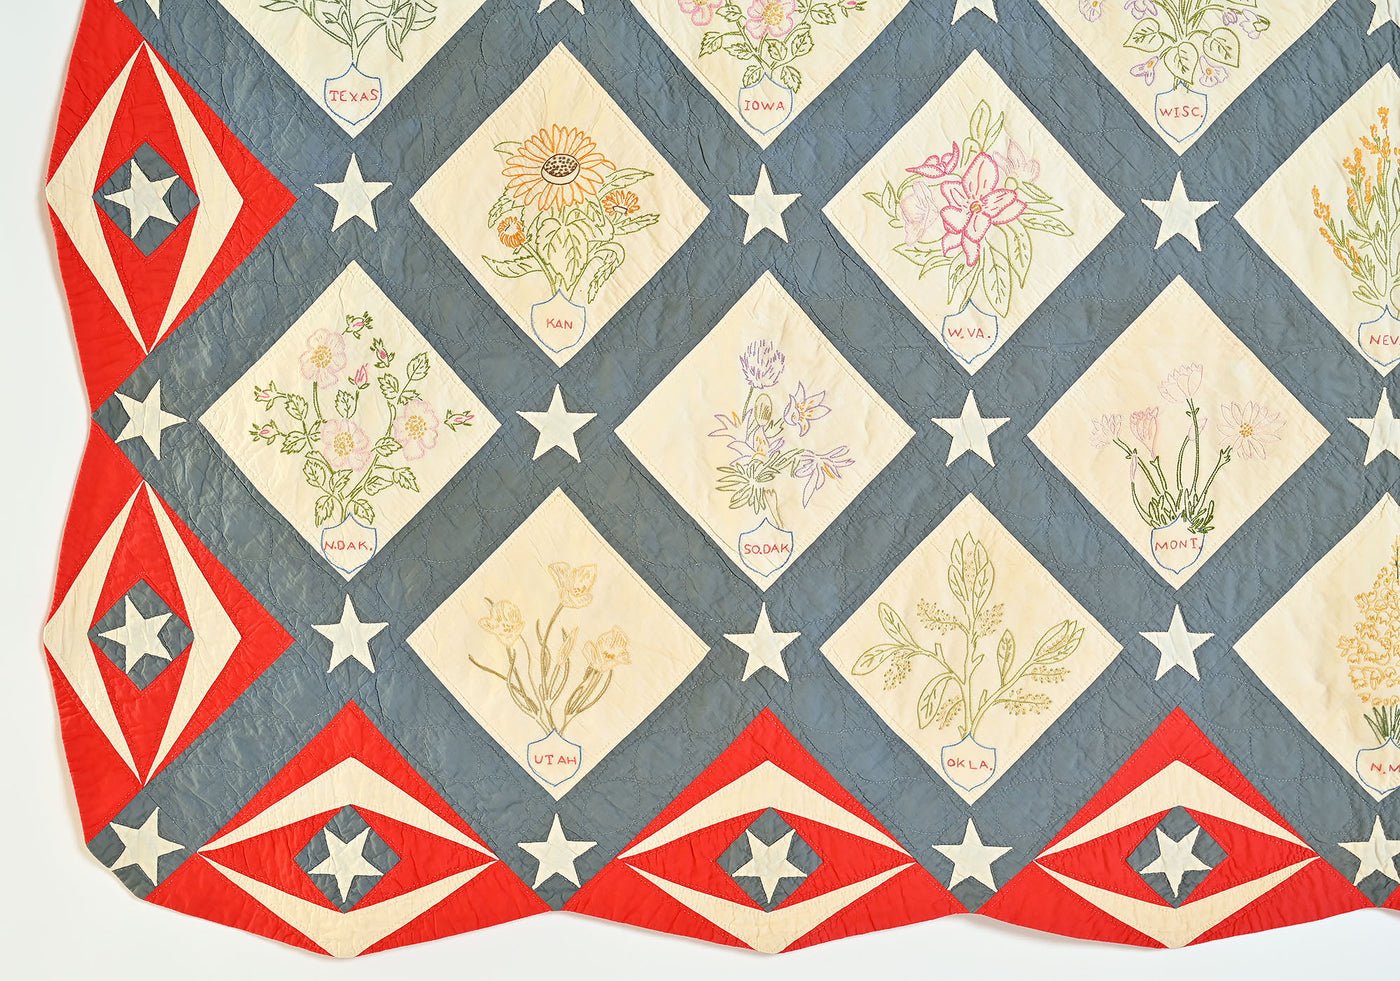 Bottom left corner of patriotic quilt with state flowers. 